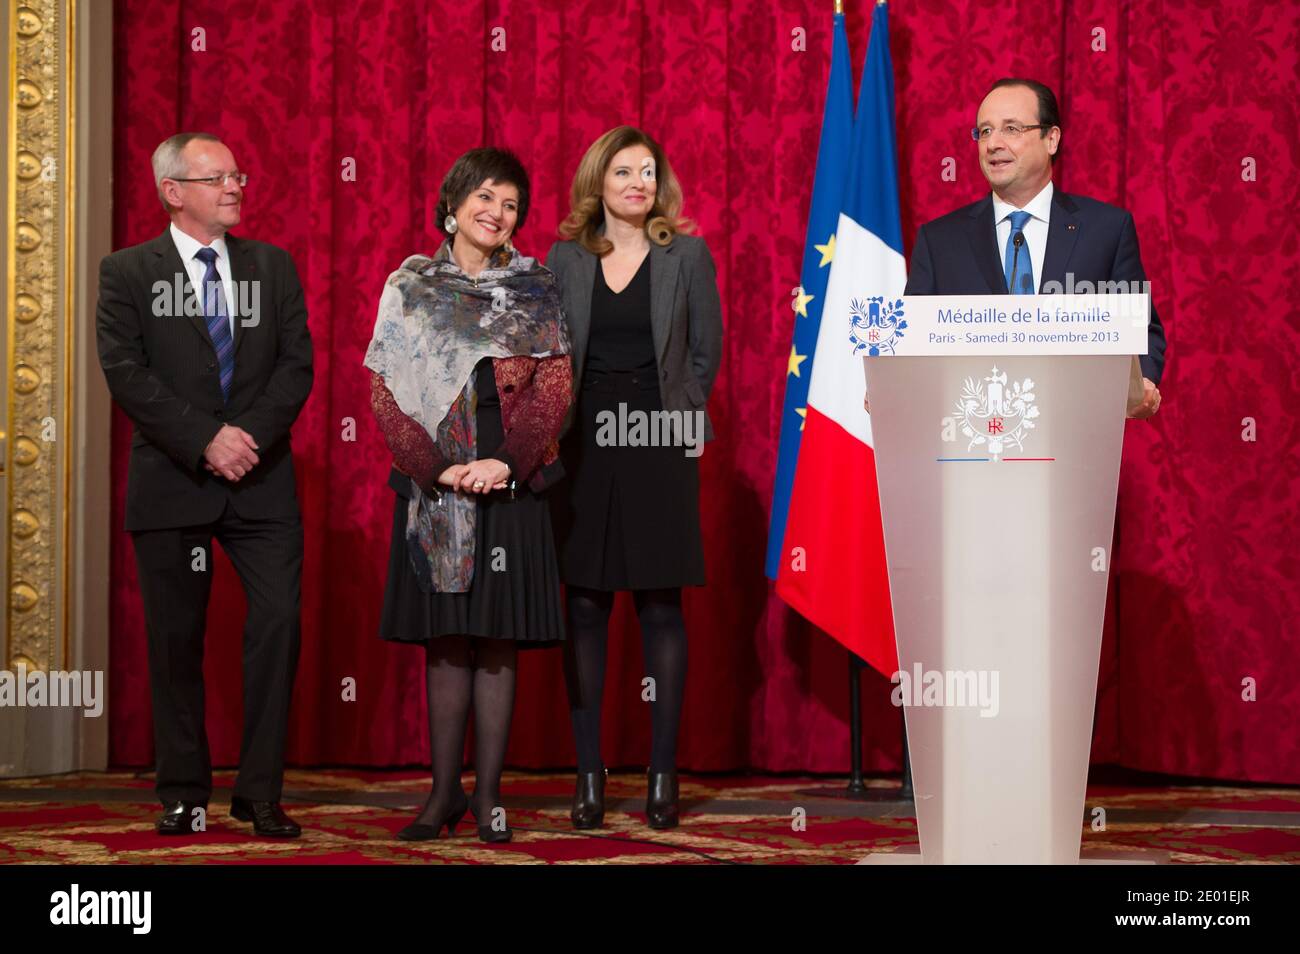 French President Francois Hollande delivers his speech watched by his companion Valerie Trierweiler and Junior Minister for the Disabled Marie-Arlette Carlotti during the annual awarding ceremony of La Medaille de la Famille Francaise (Medal of the French Family), at the Elysee Palace in Paris, France on November 30, 2013. The award is to honour those who have successfully raised several children with dignity. Photo by Nicolas Gouhier/ABACAPRESS.COM Stock Photo